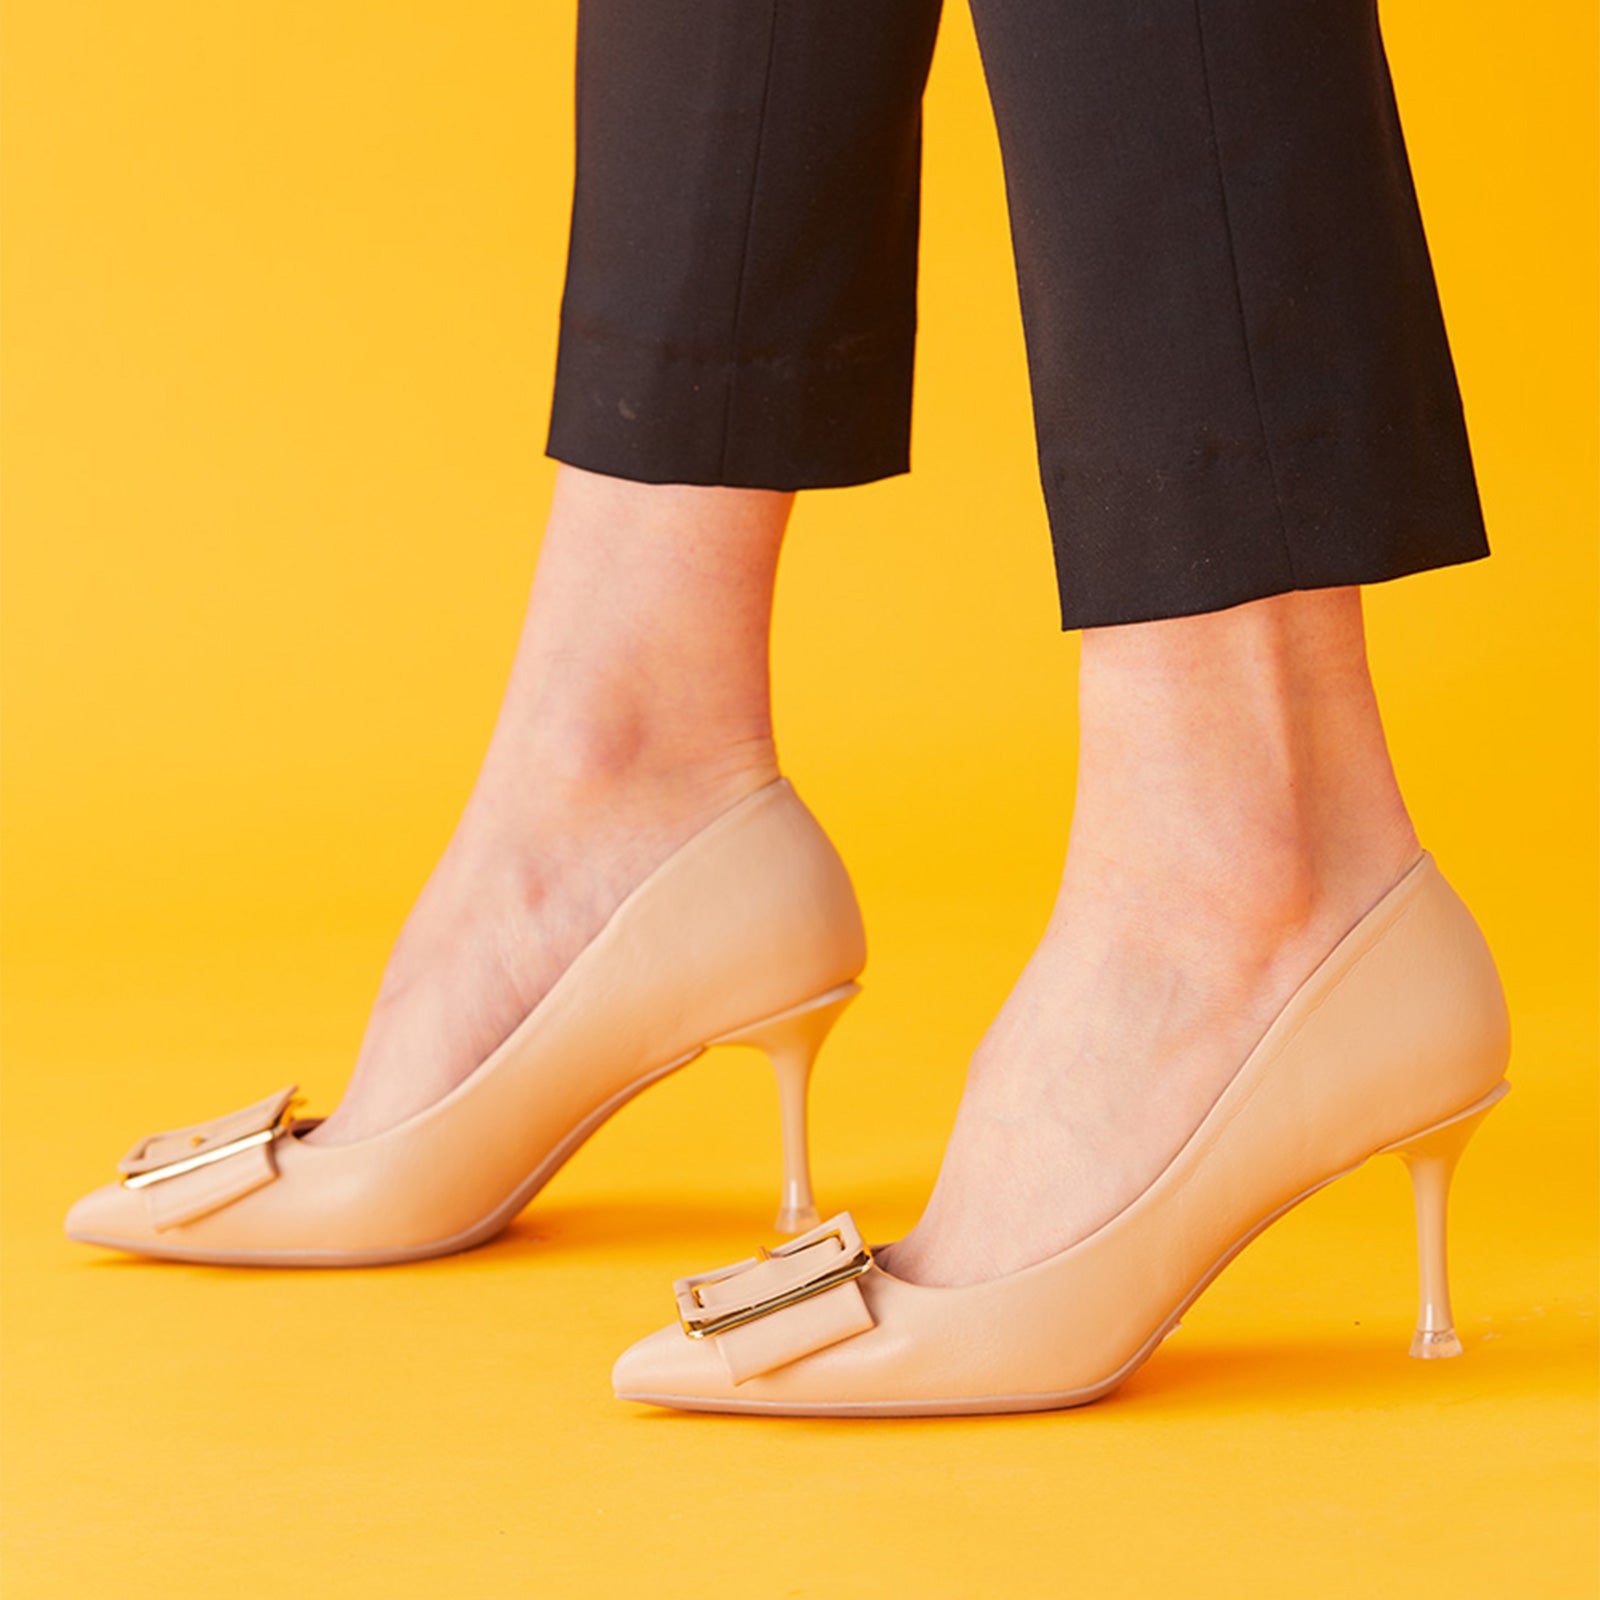 Cityscape Sophistication: Beige Square Buckled Pumps, perfect for a confident and fashionable look in any urban setting.